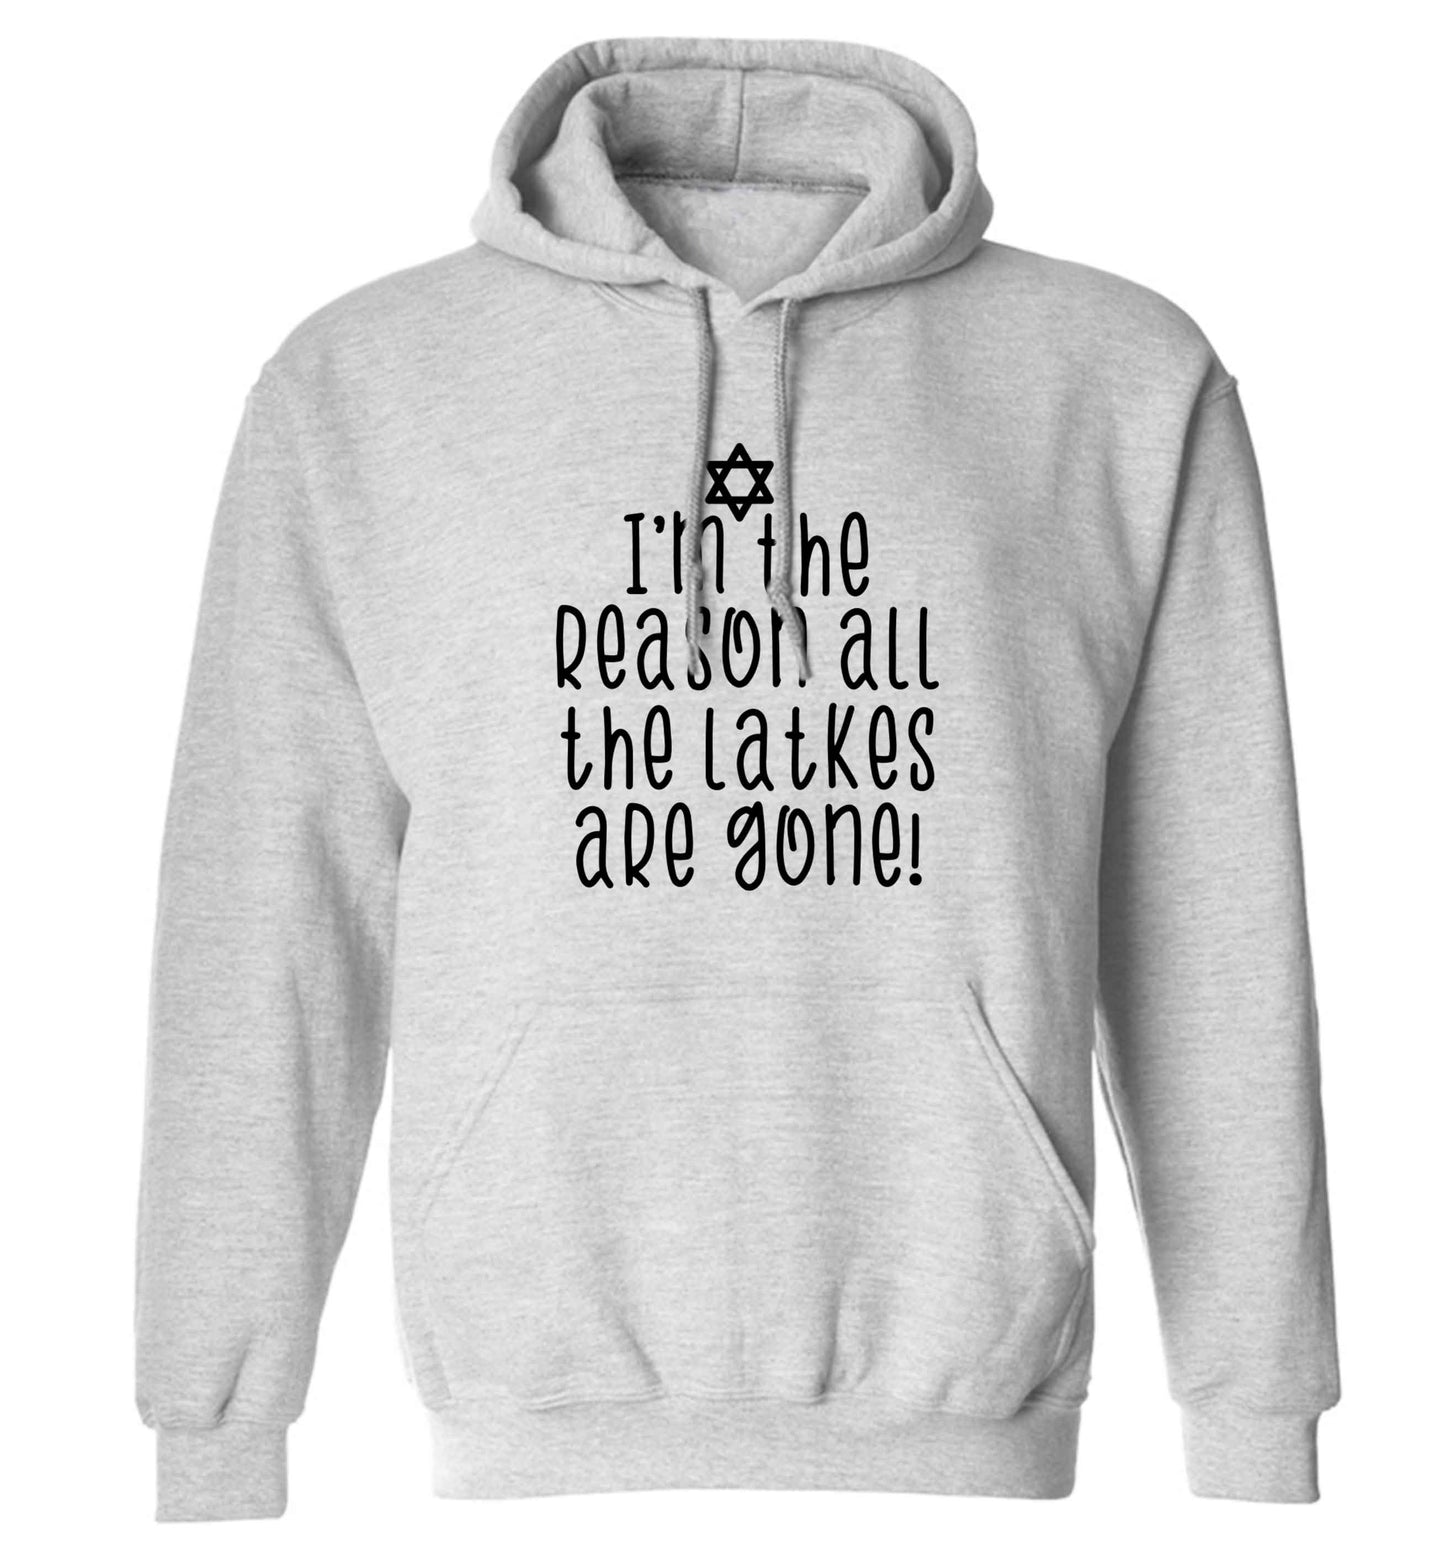 I'm the reason all the latkes are gone adults unisex grey hoodie 2XL